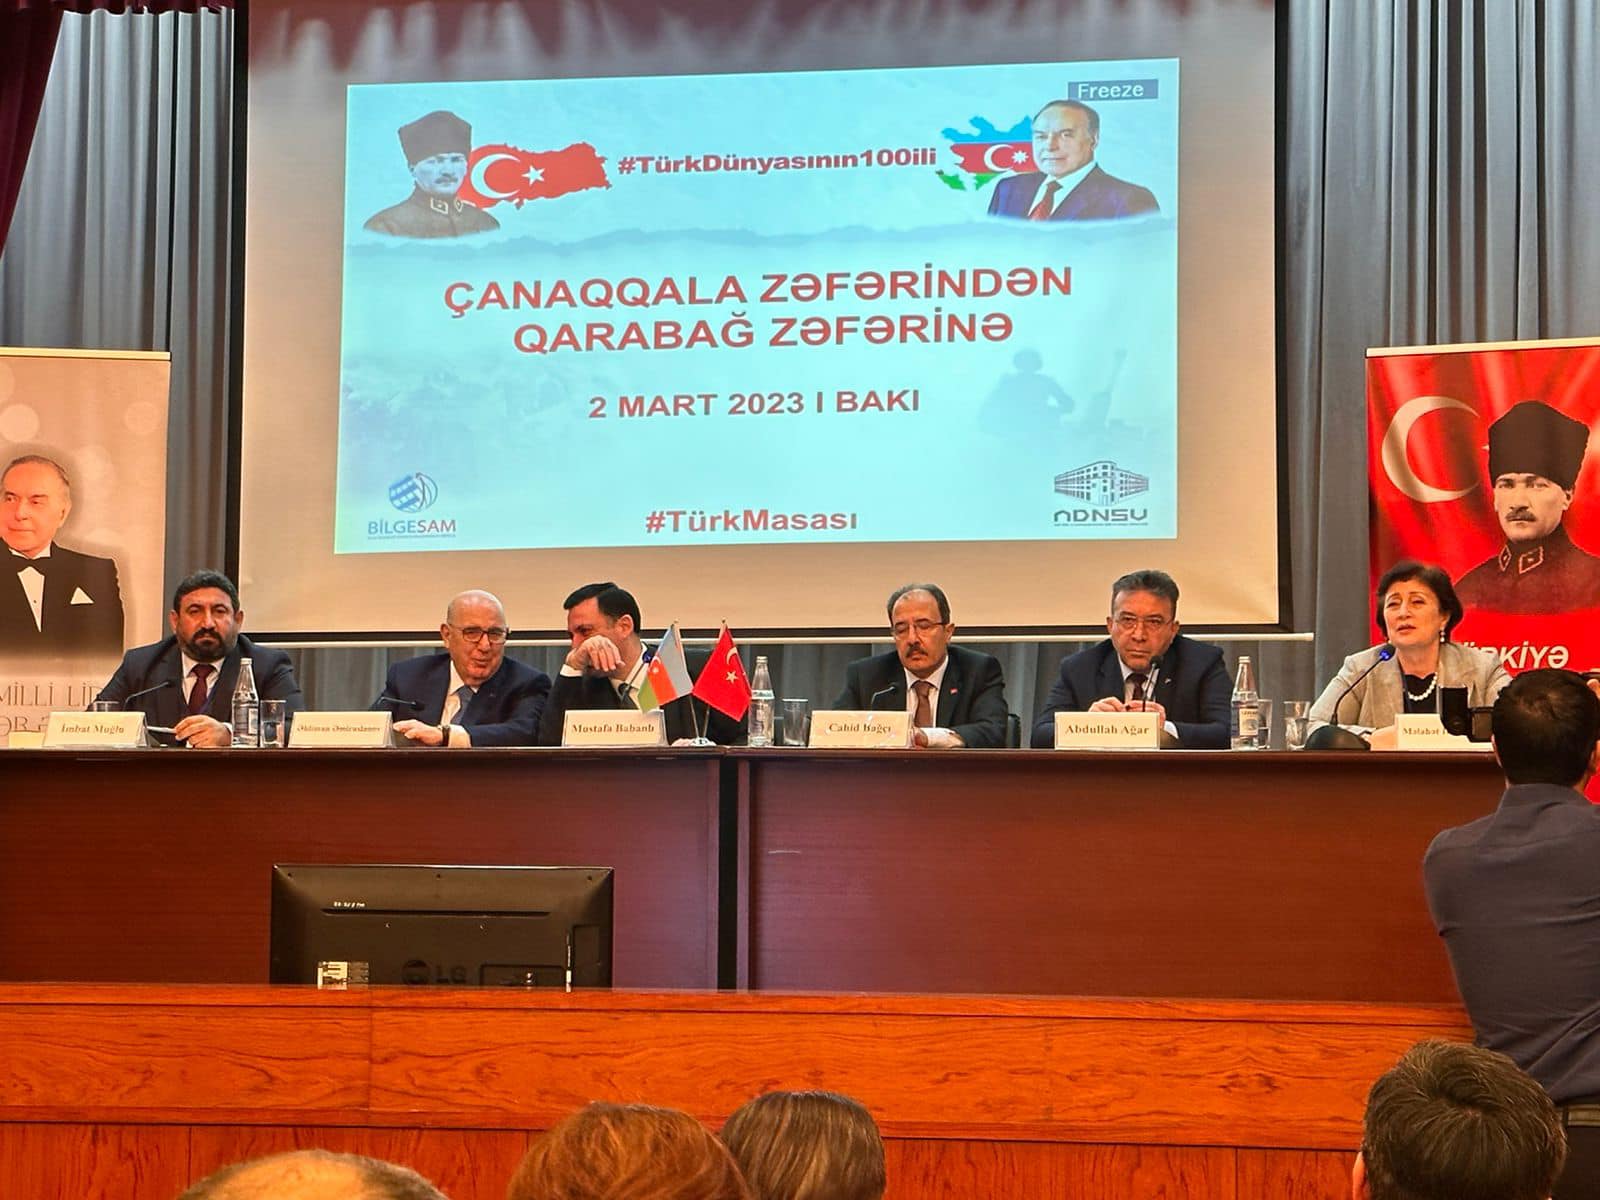 #BİLGESAM Security and Terrorism expert Dr. İmbat Muğlu participated in the "From Çanakkale Victory to Karabakh Victory" event held in Baku.